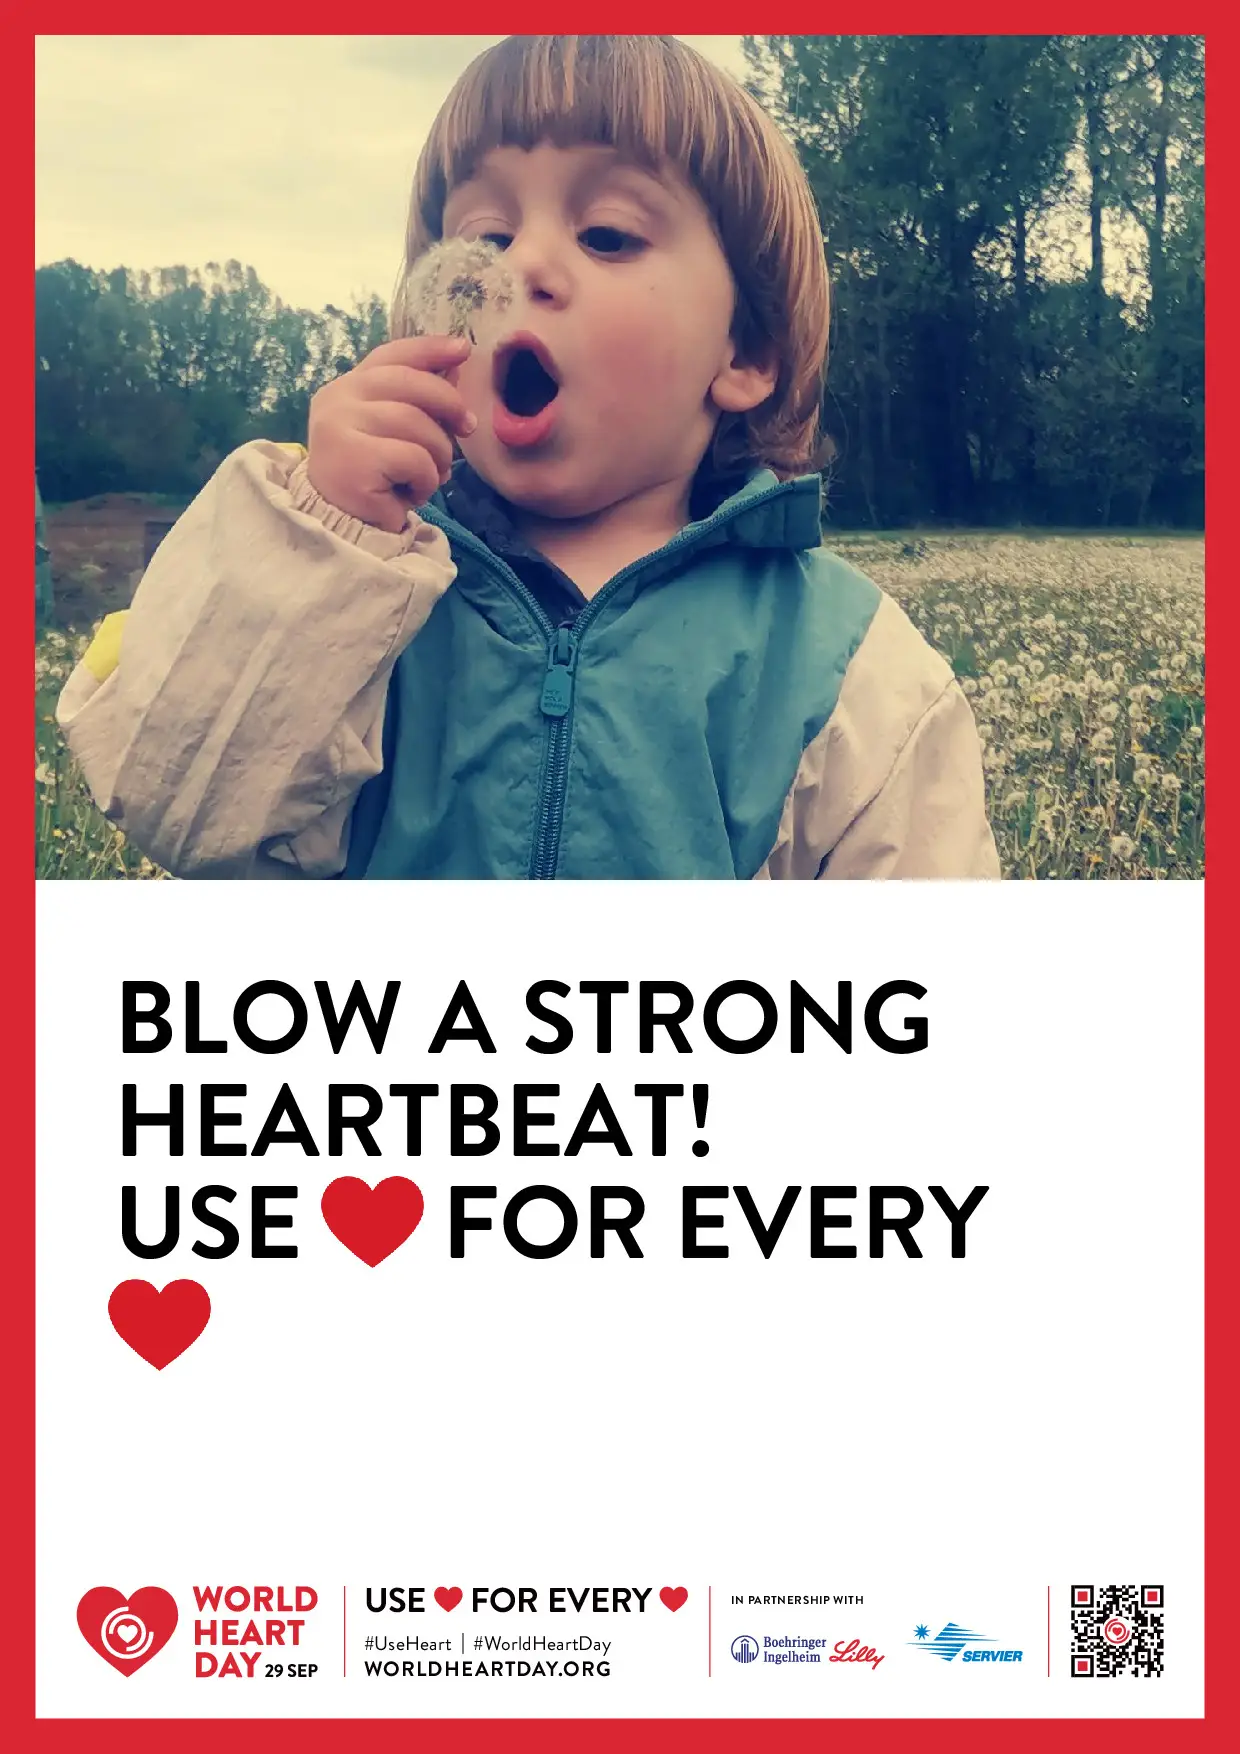 Blow a strong heartbeat